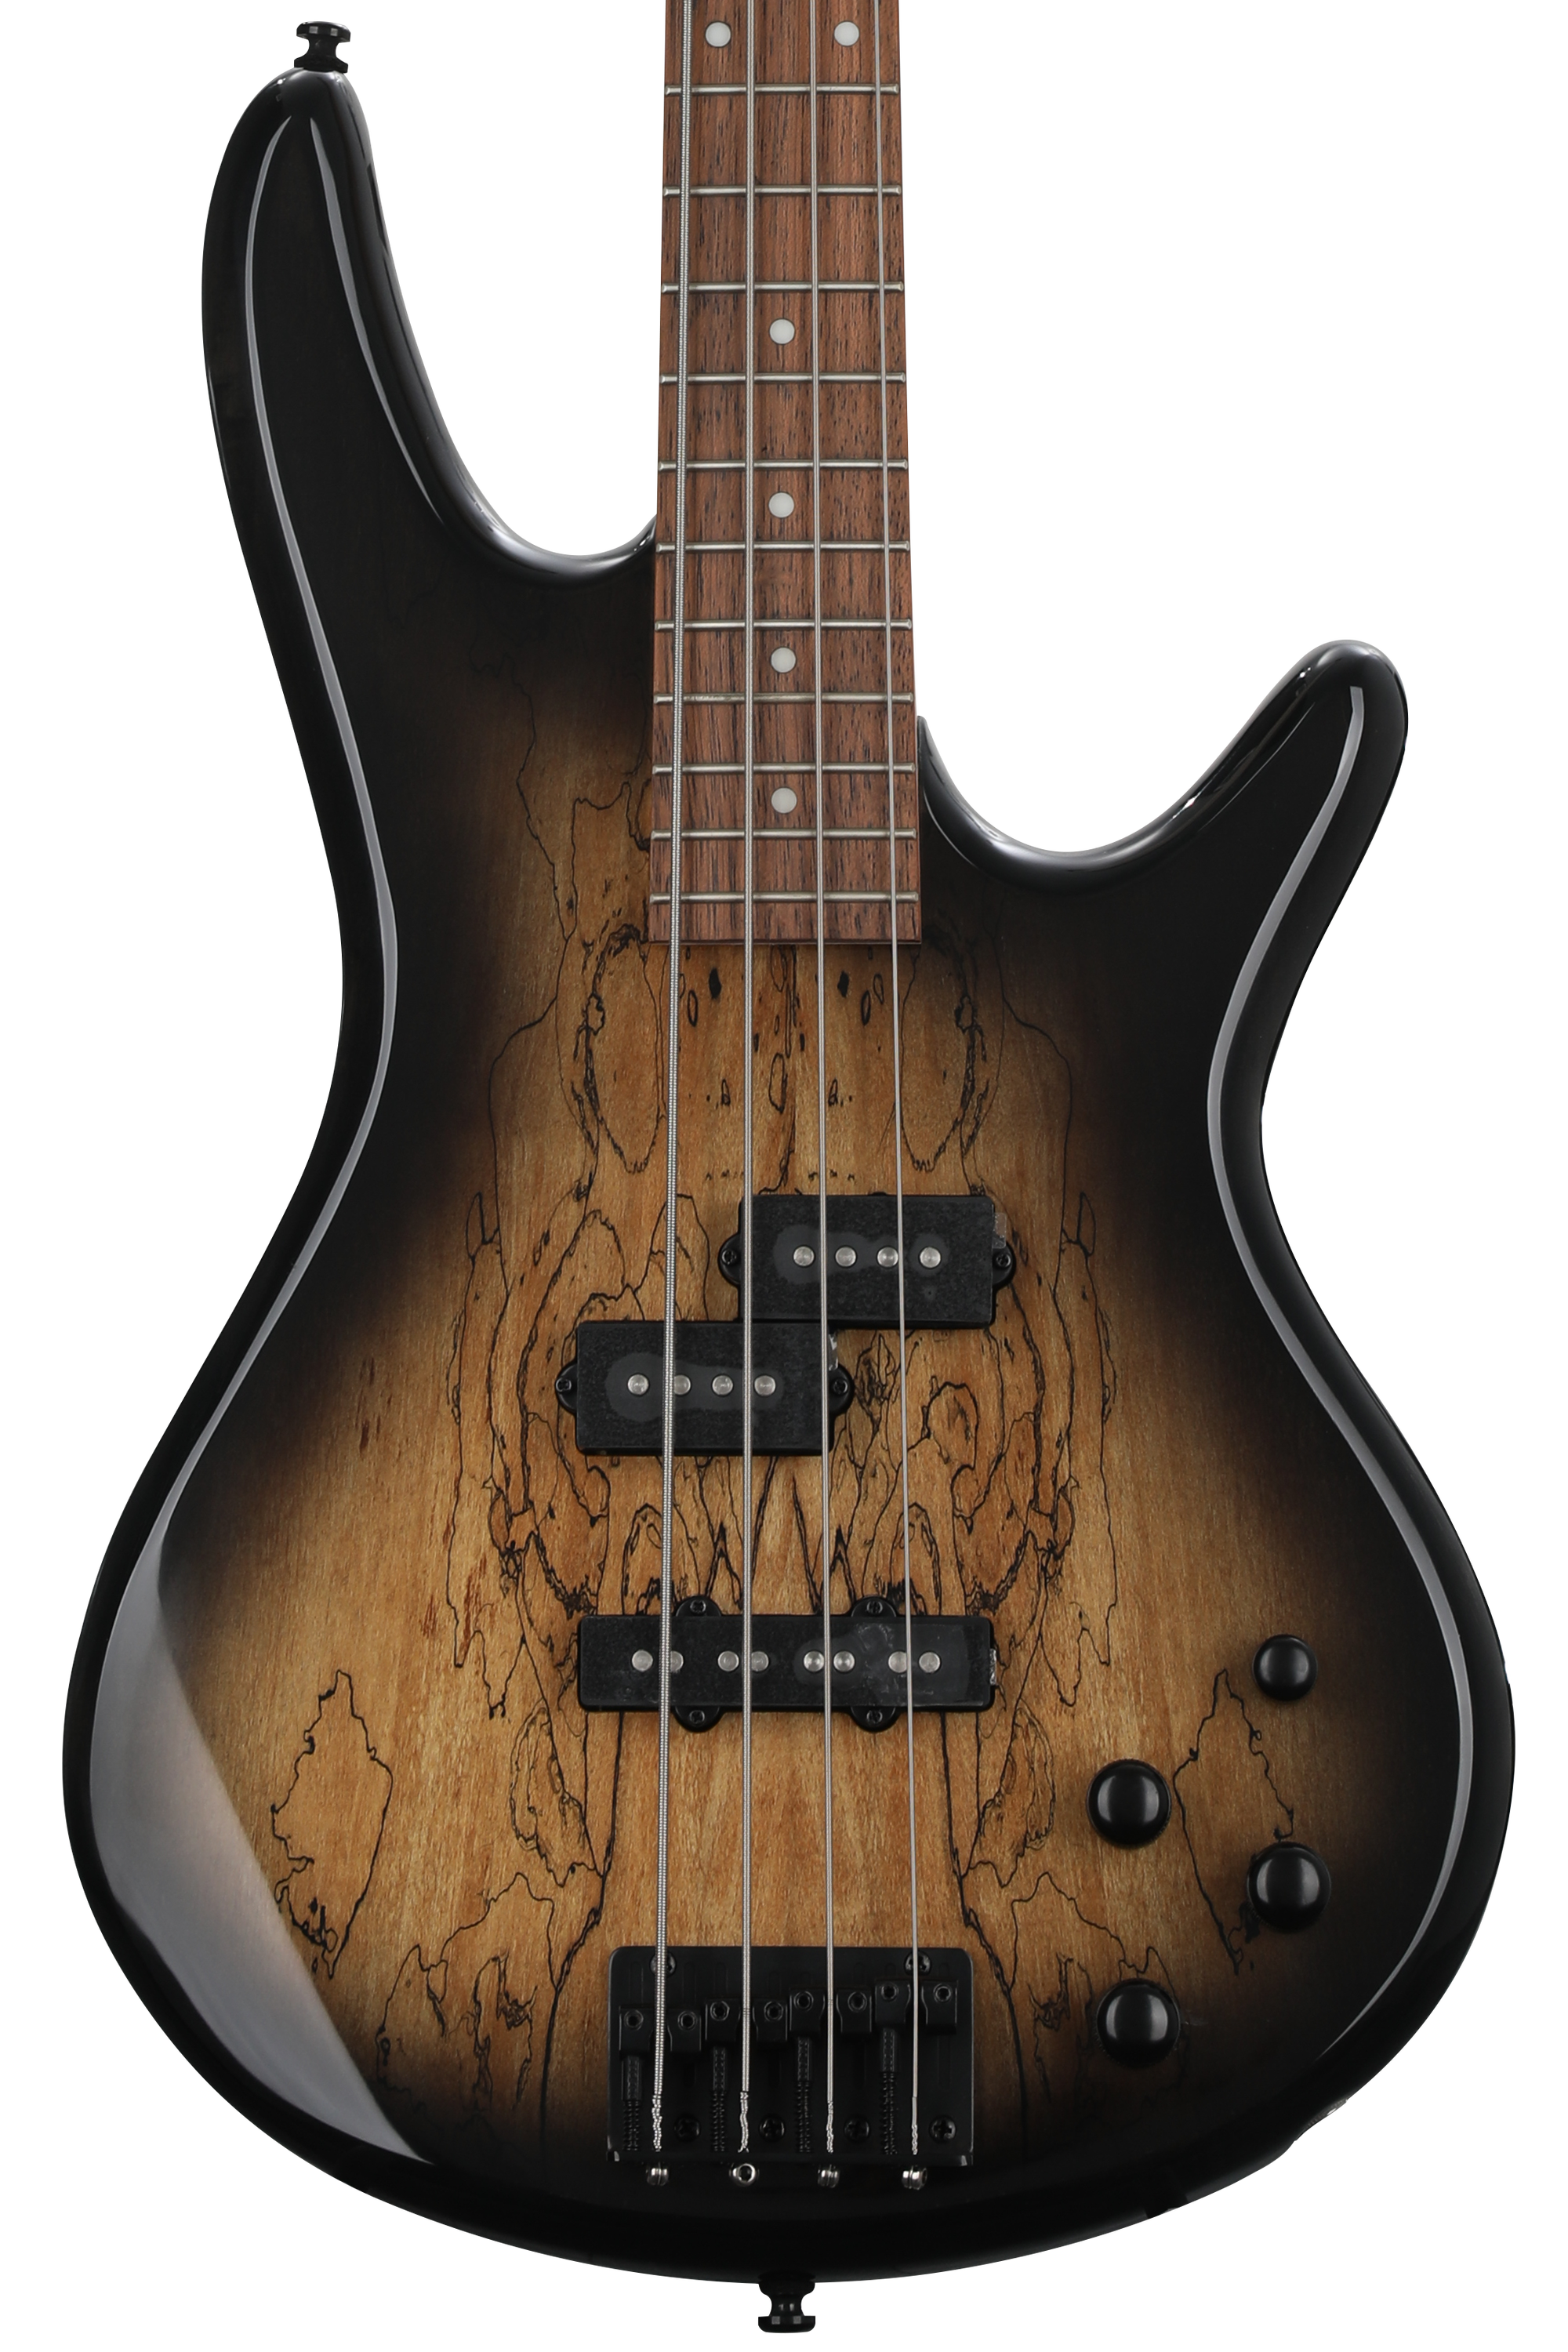 Ibanez Gio GSR200SMNGT Bass Guitar - Natural Gray Burst | Sweetwater